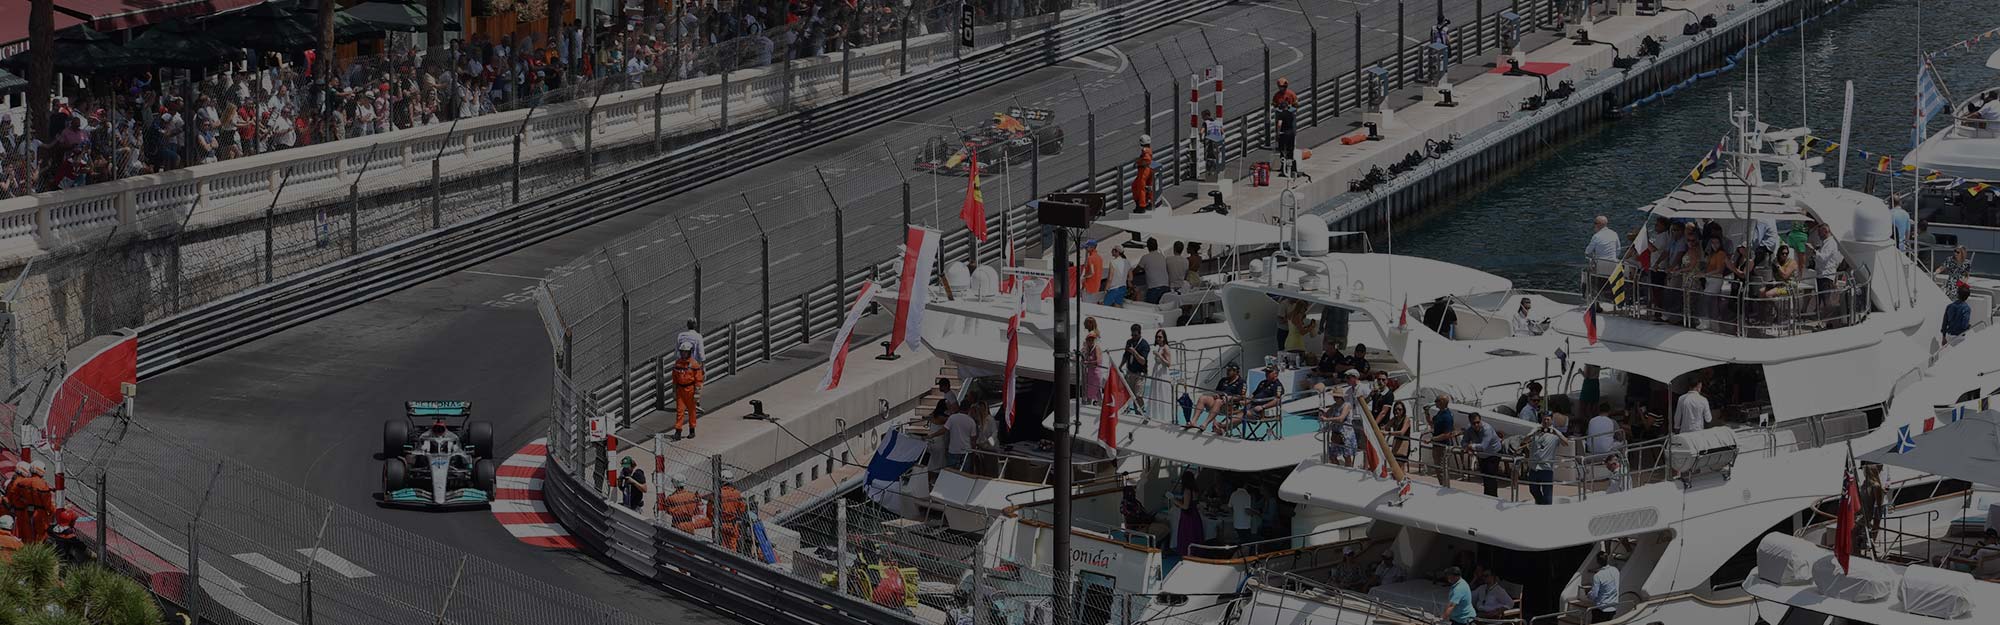 grand prix cars racing in monaco with spectators watching from luxury yachts